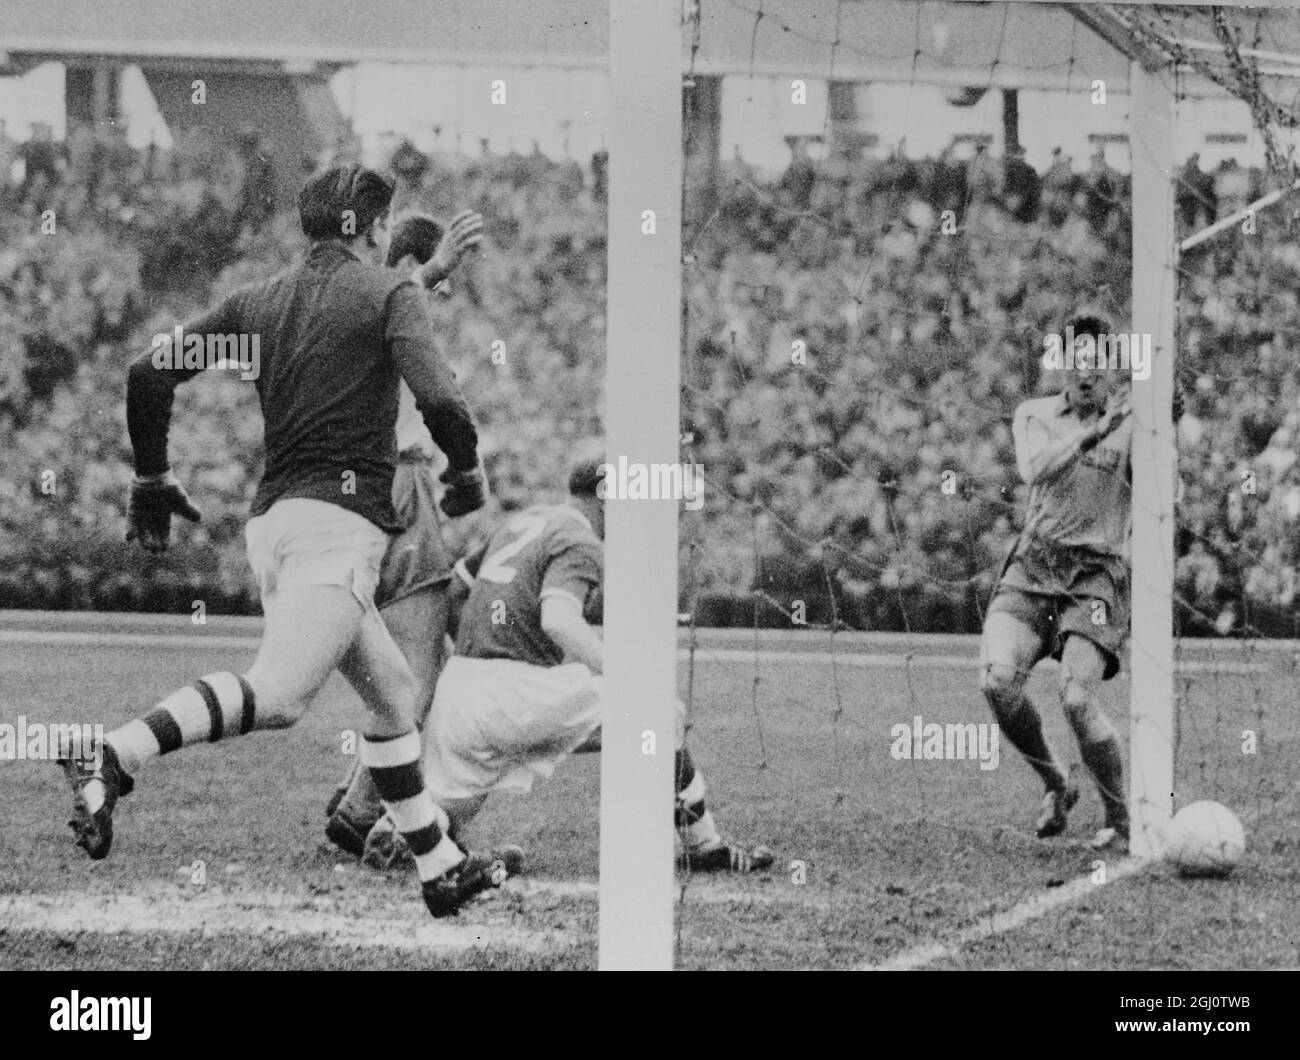 OHLSSON OVE SCORES - 20 MAY 1960 Stock Photo